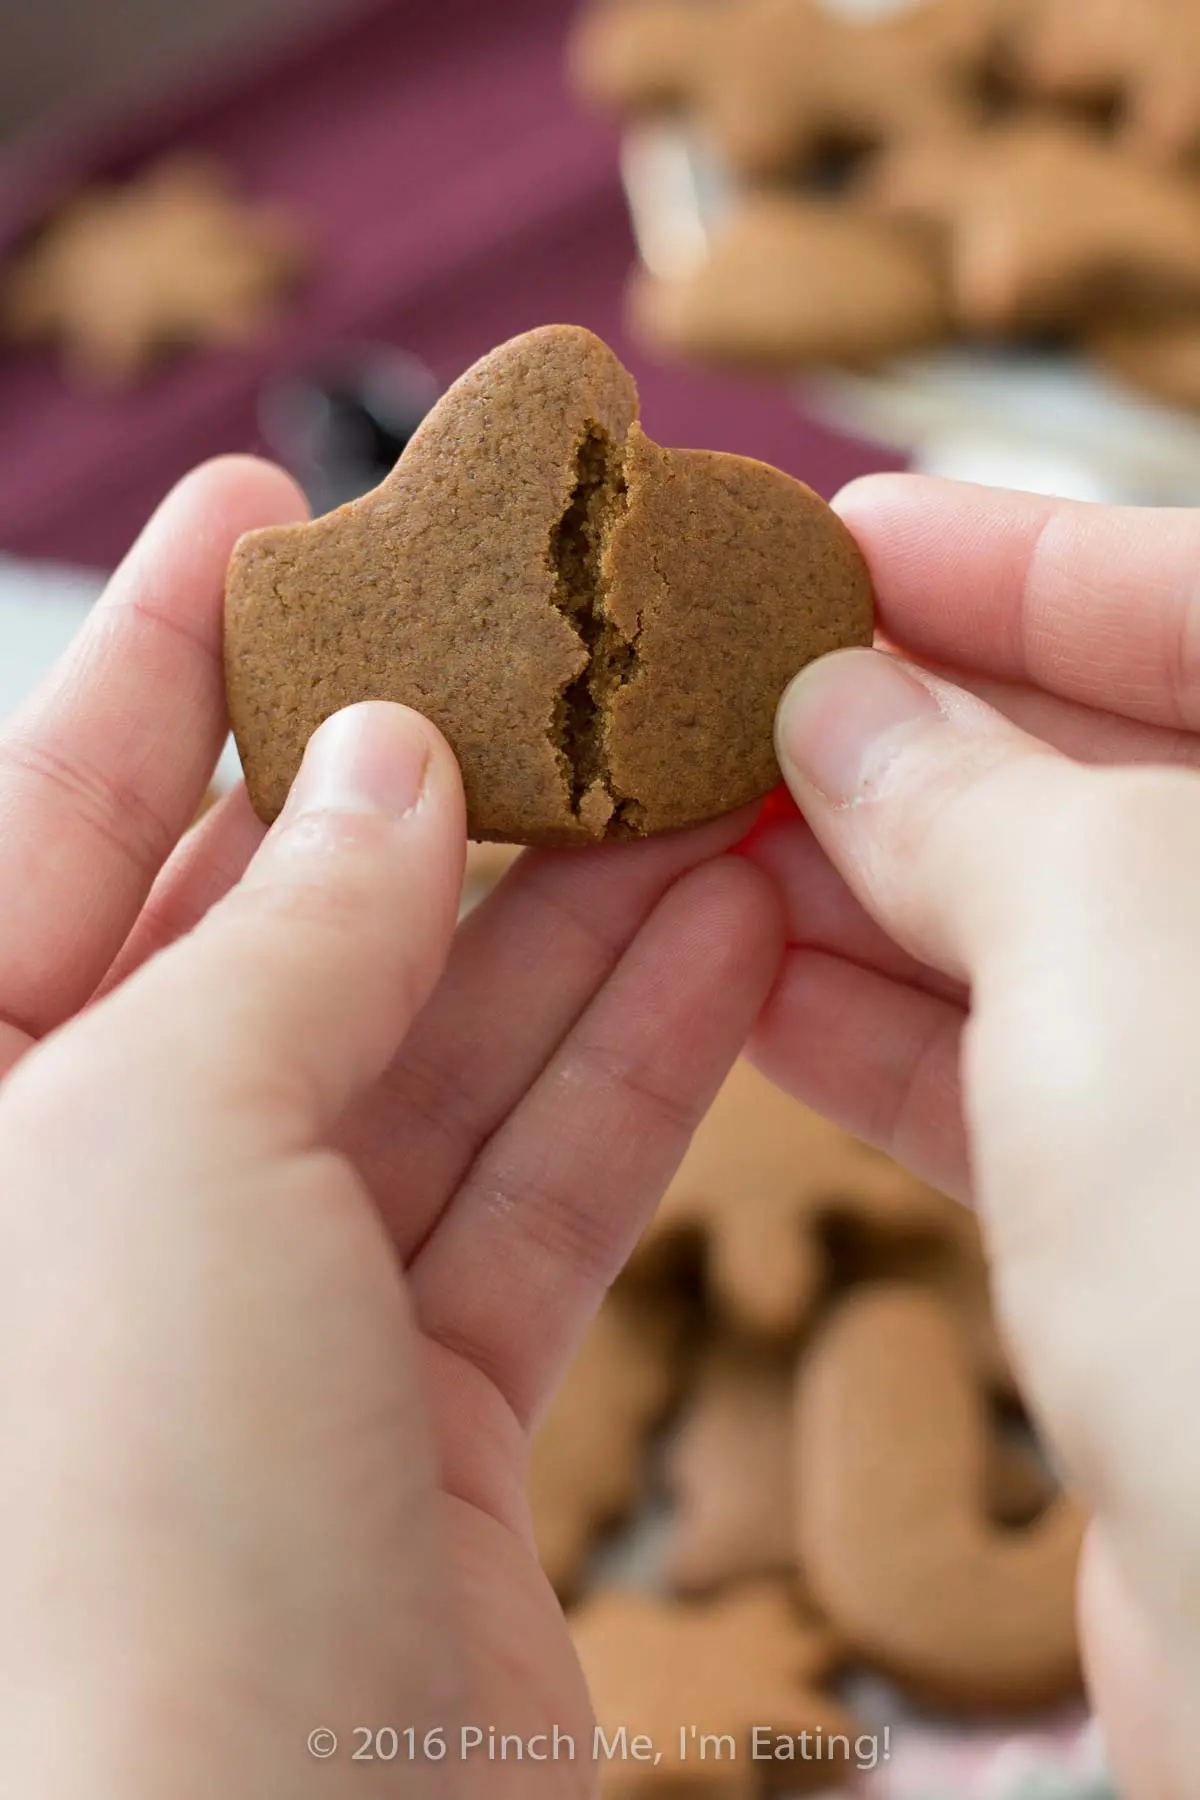 Hands breaking apart chewy gingerbread cookie to show soft texture